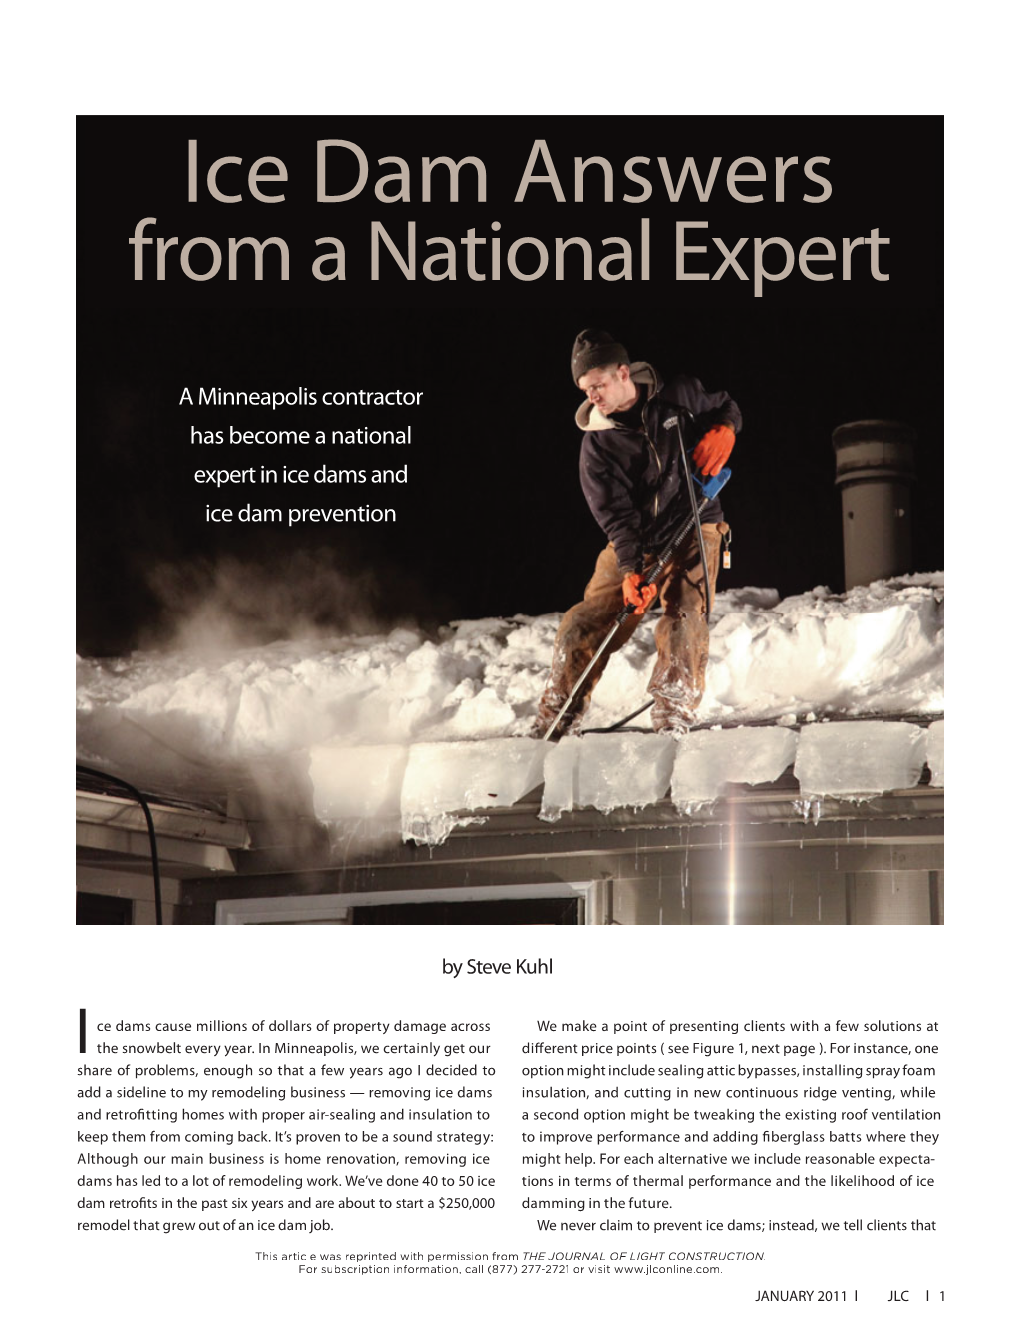 Ice Dam Answers from a National Expert